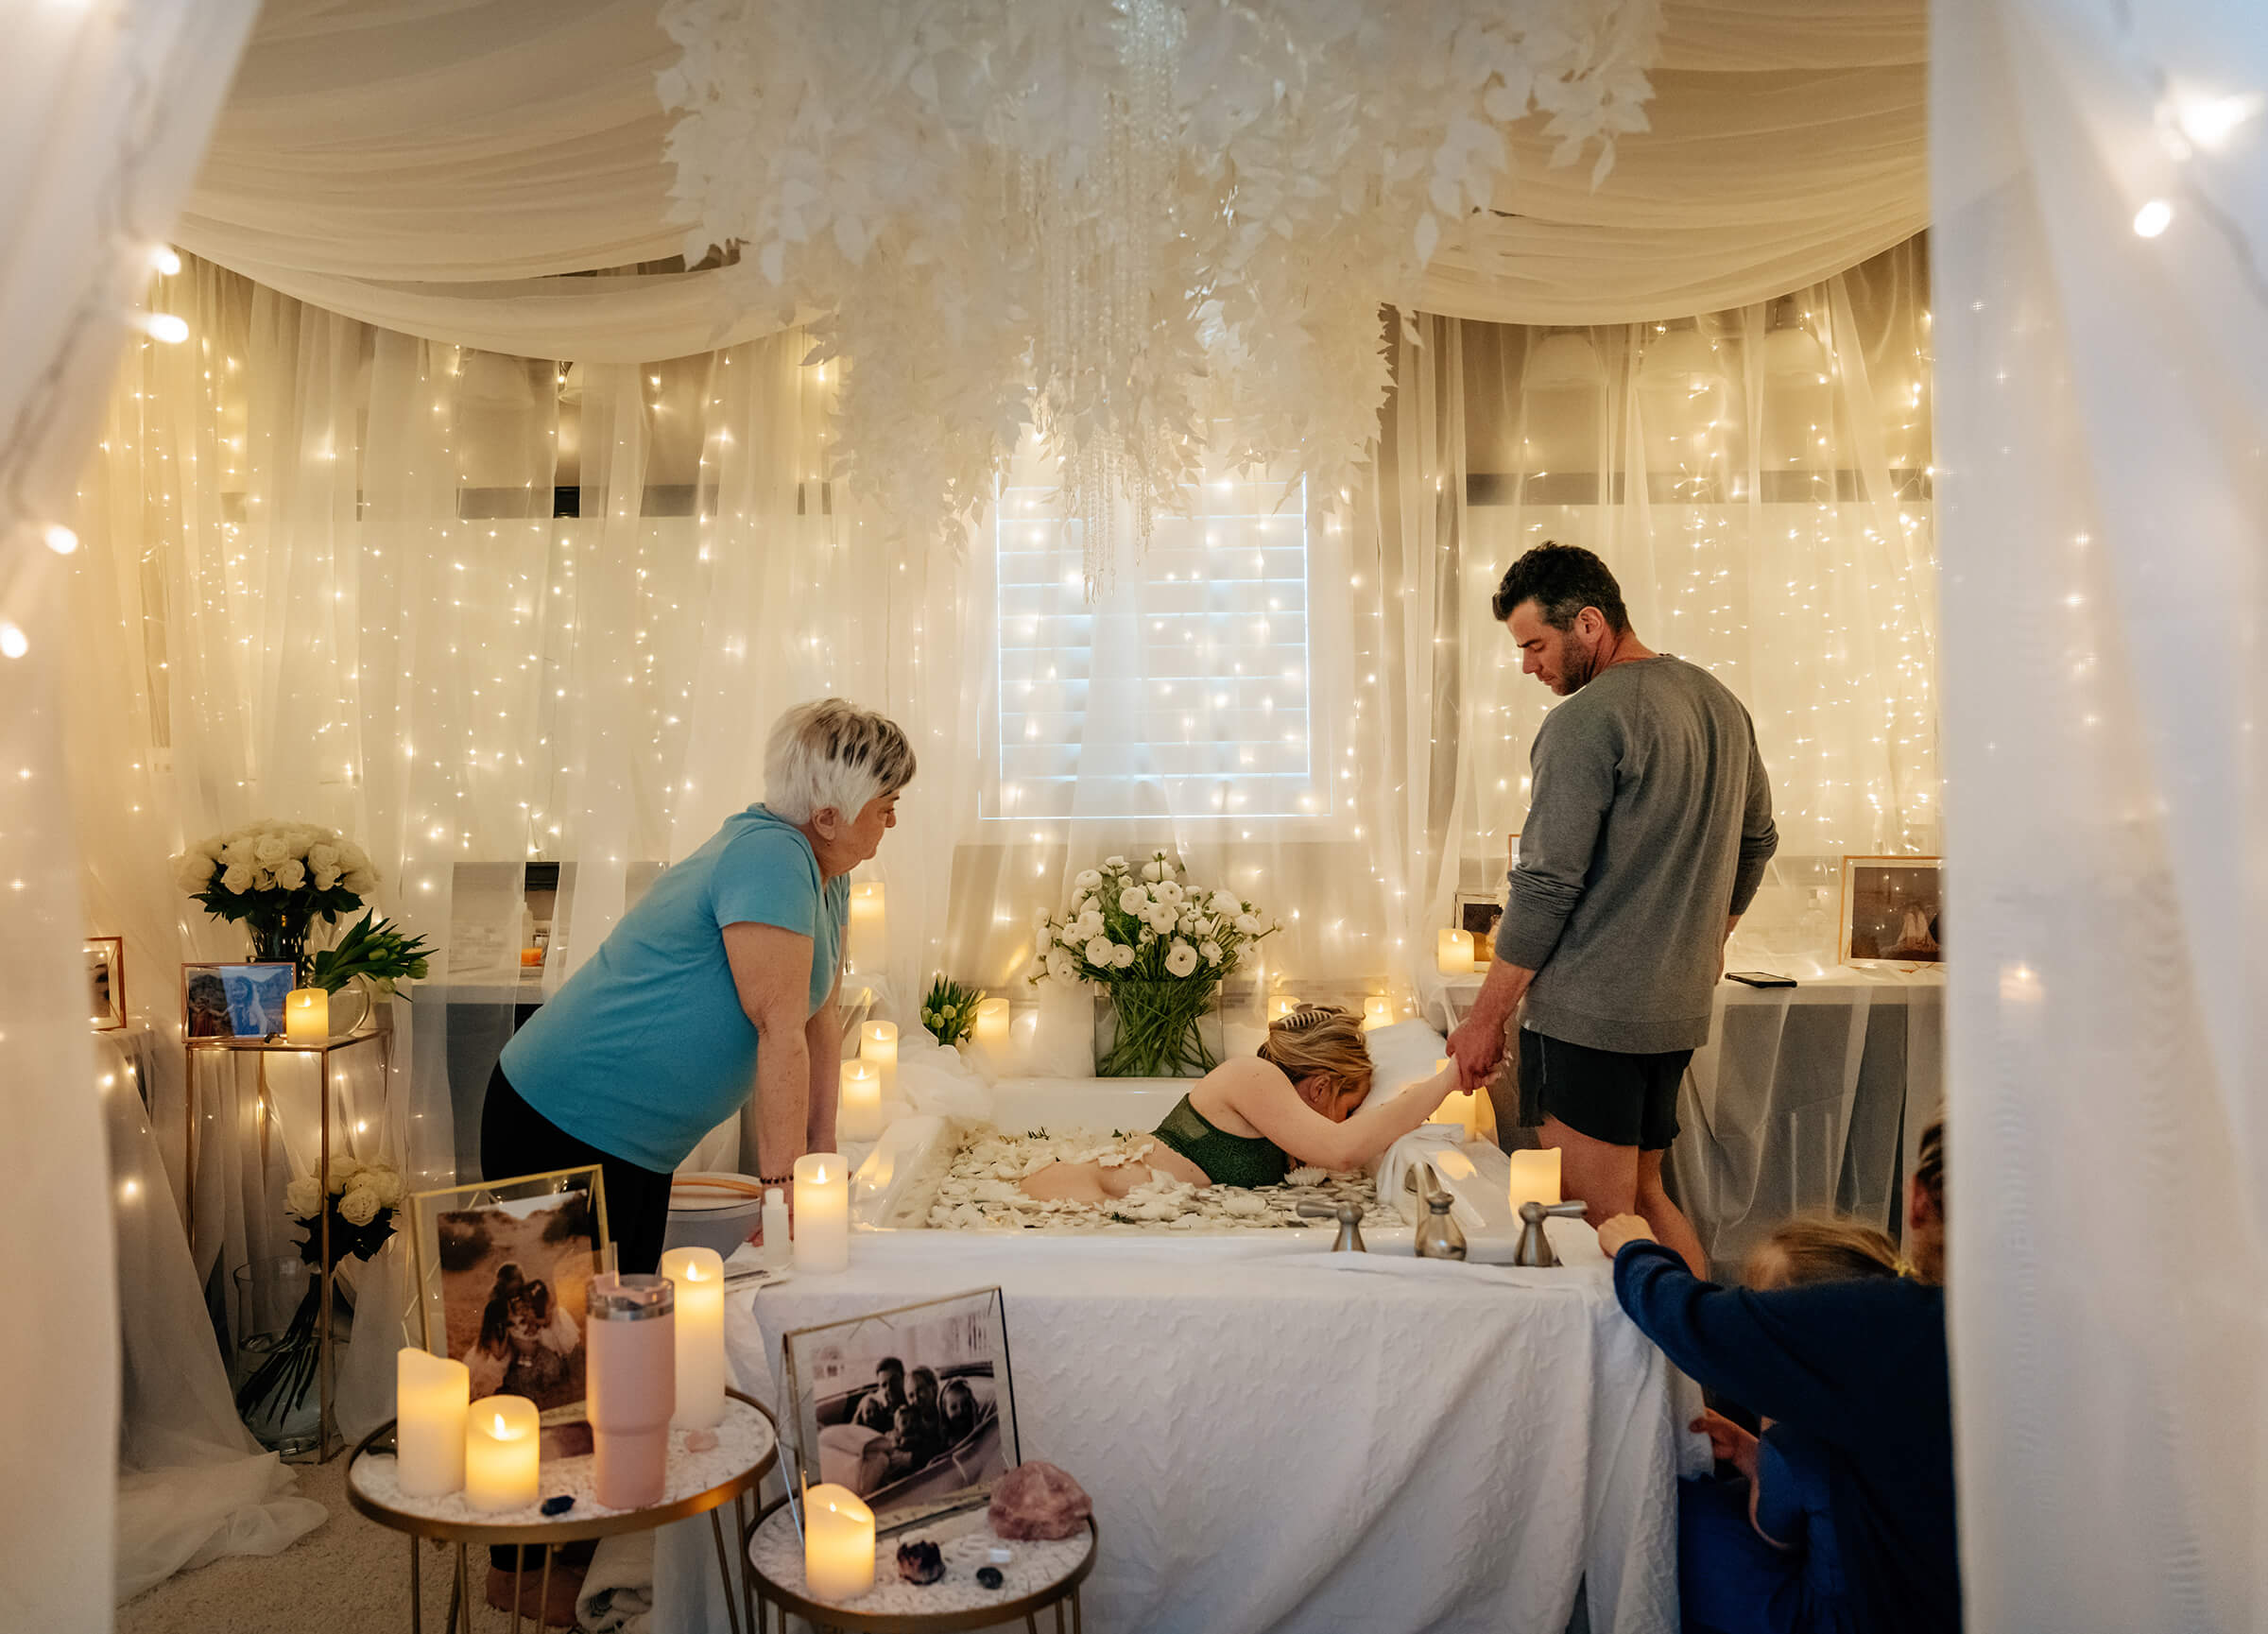 birth space decorated with white flowers and lights 